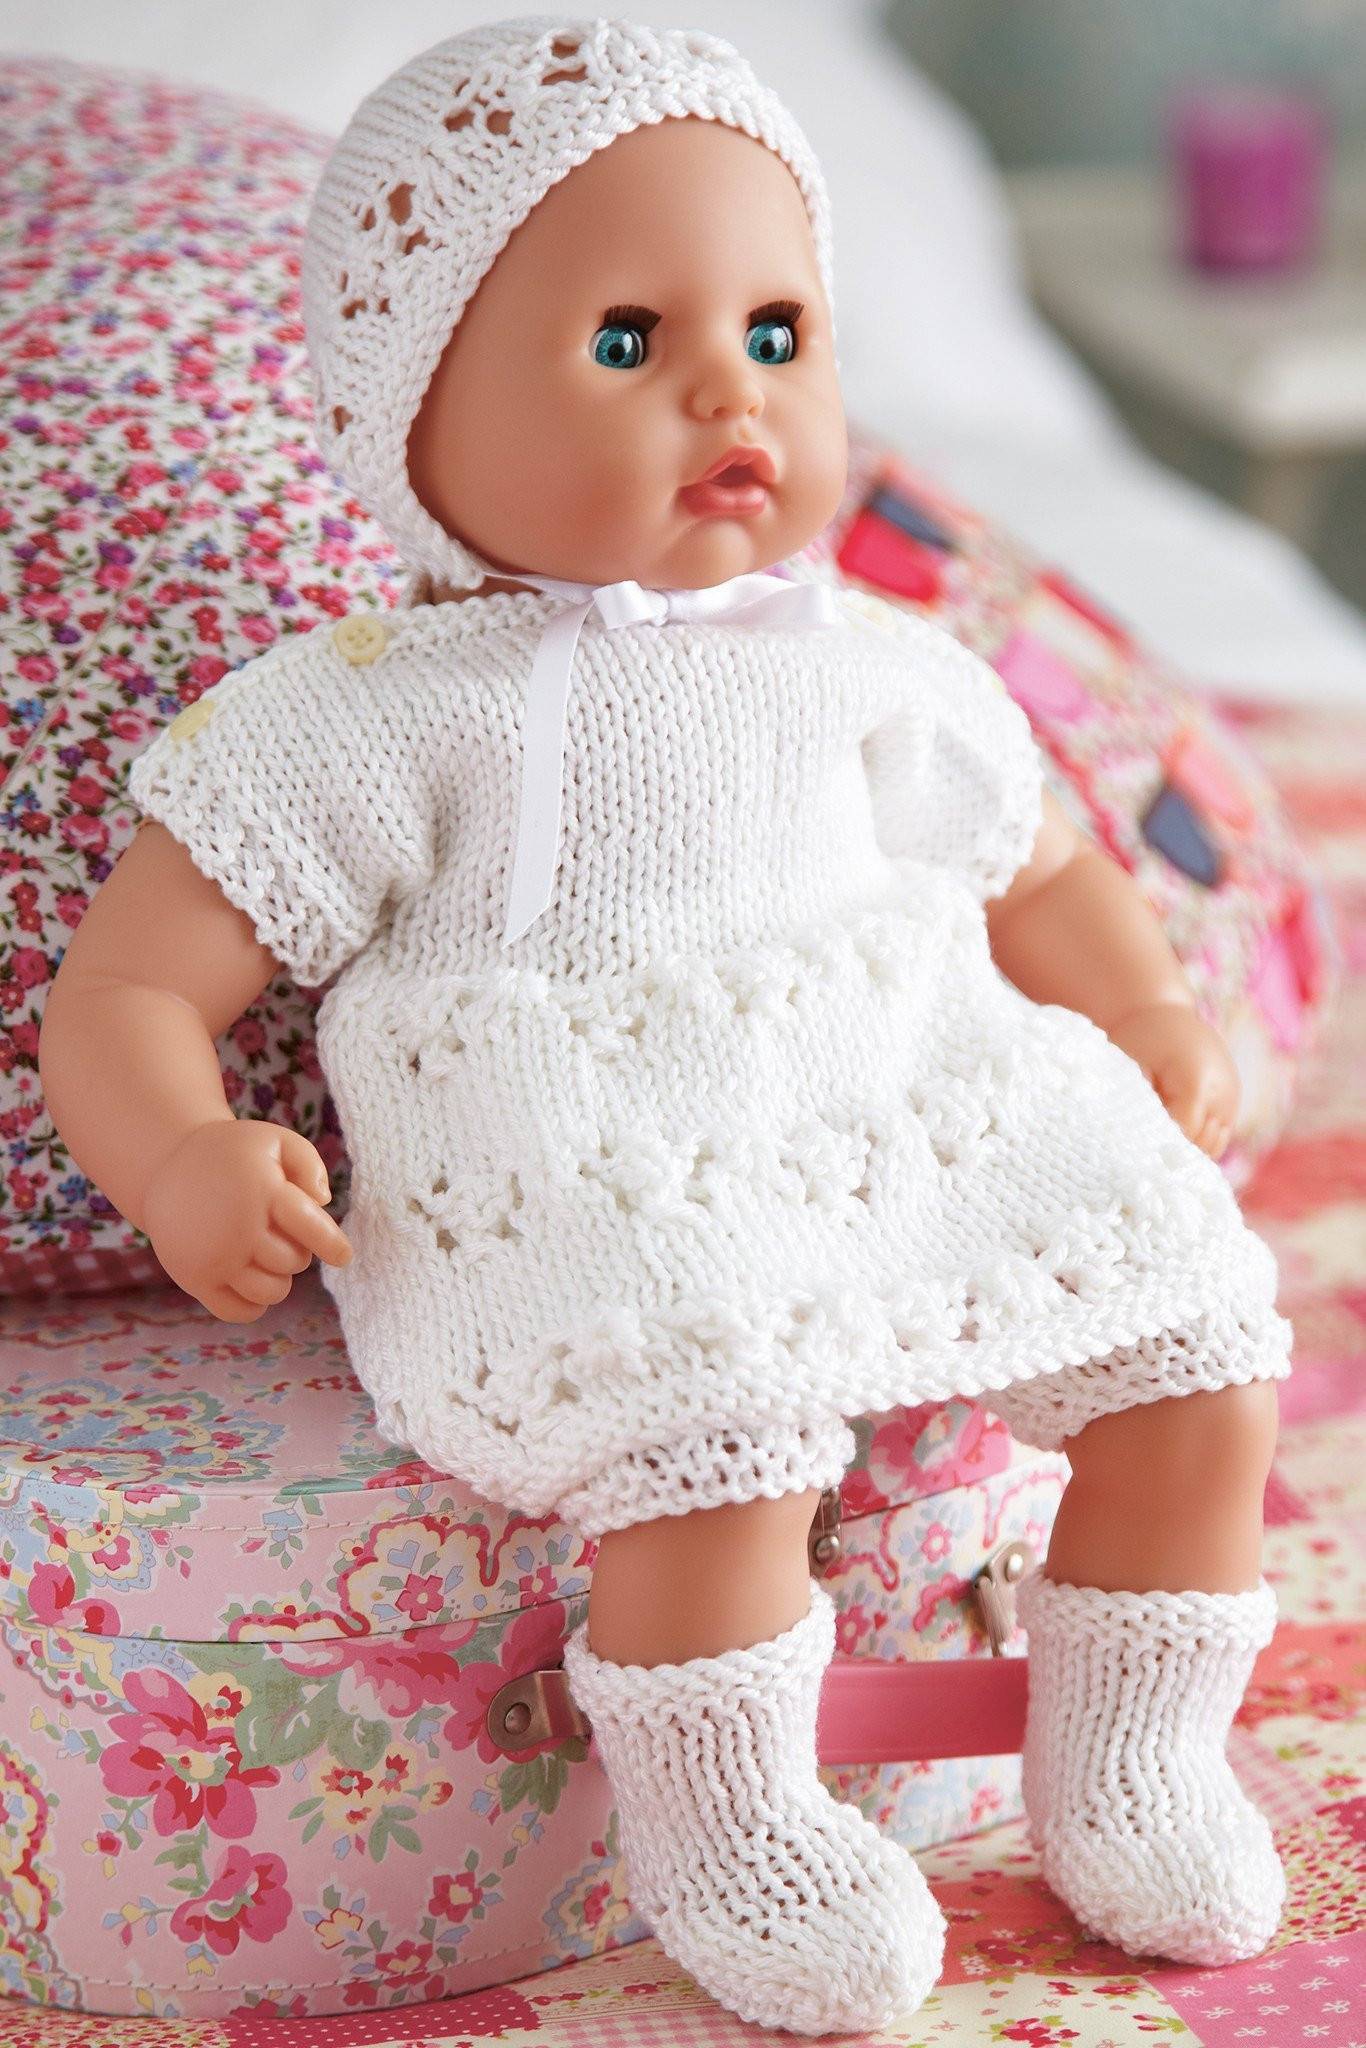 Baby Doll Clothes Set Knitting Pattern | The Knitting Network